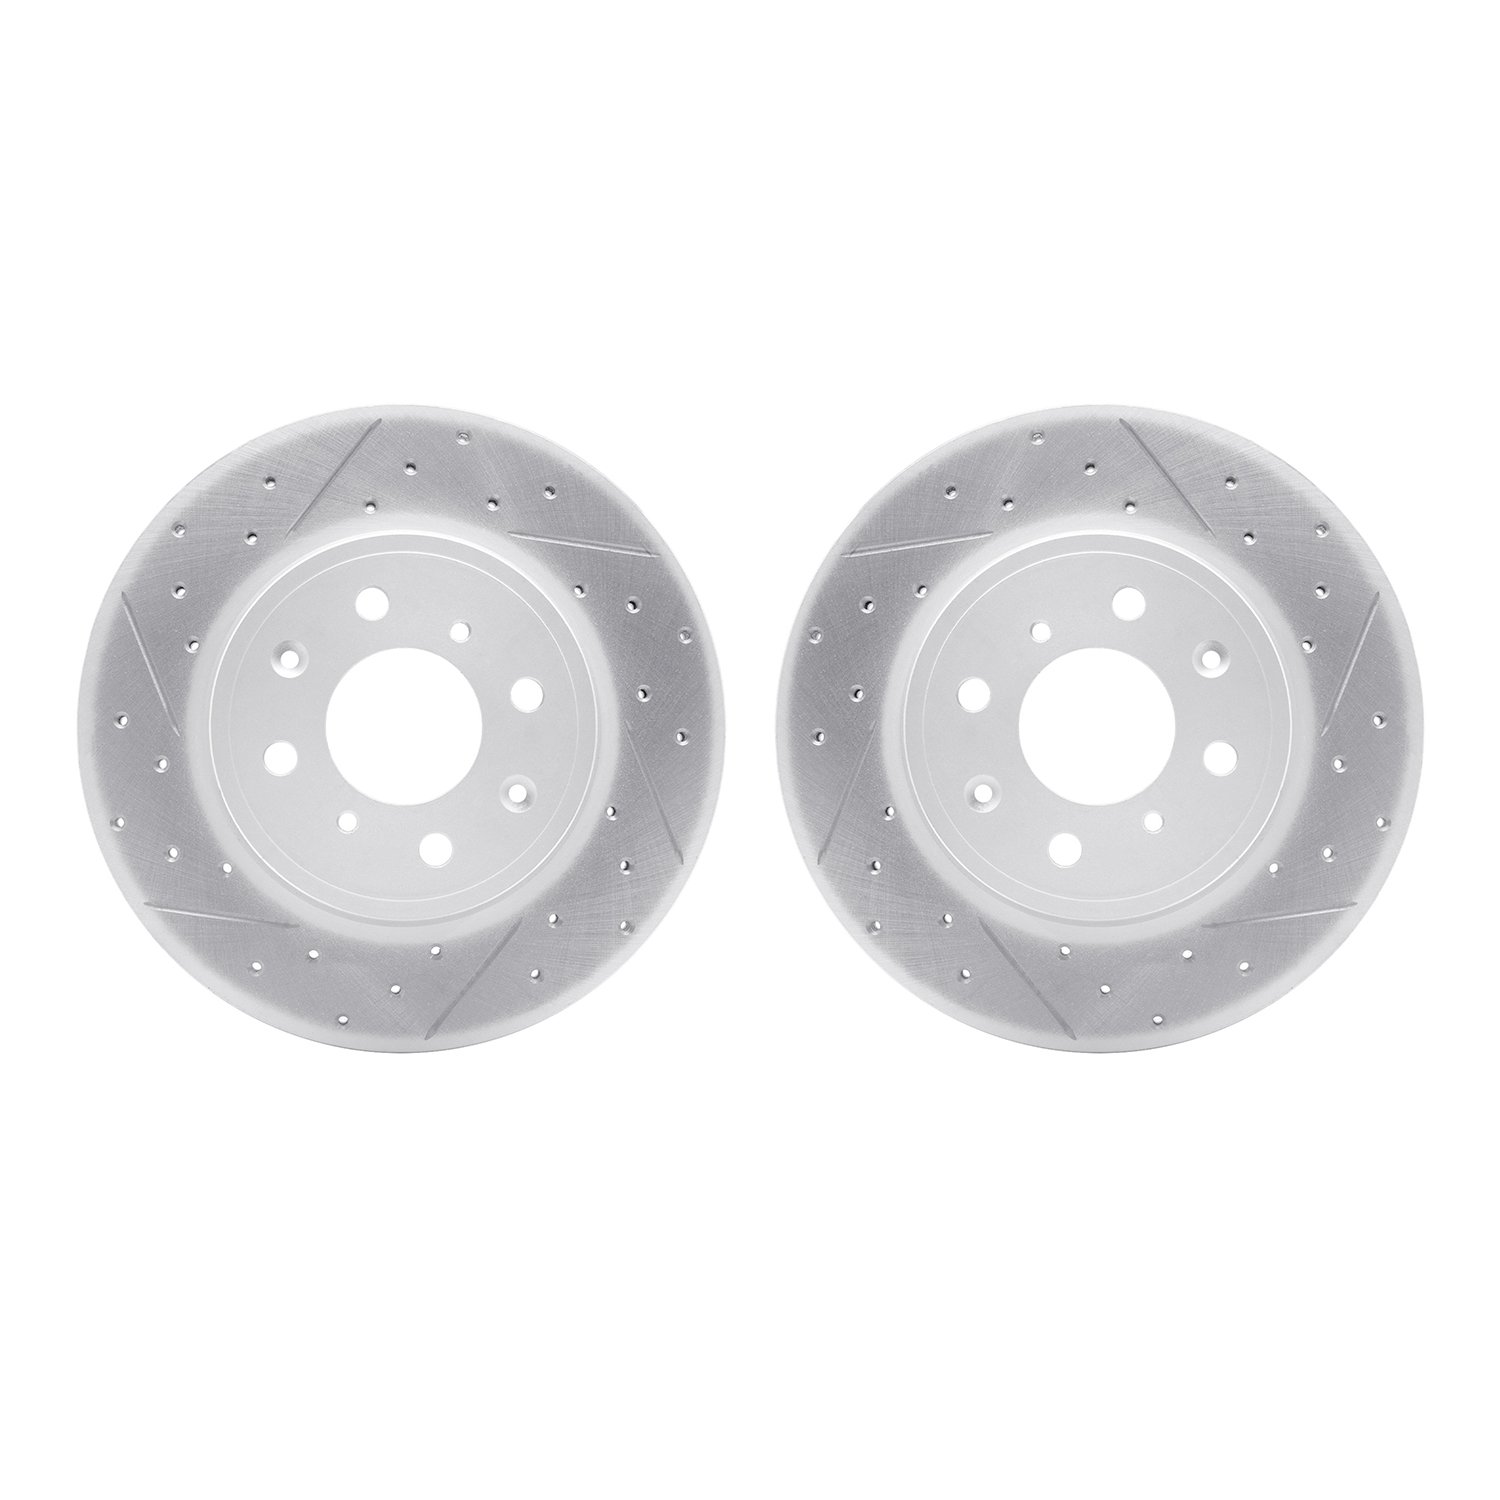 2002-59020 Geoperformance Drilled/Slotted Brake Rotors, 2014-2020 Acura/Honda, Position: Front